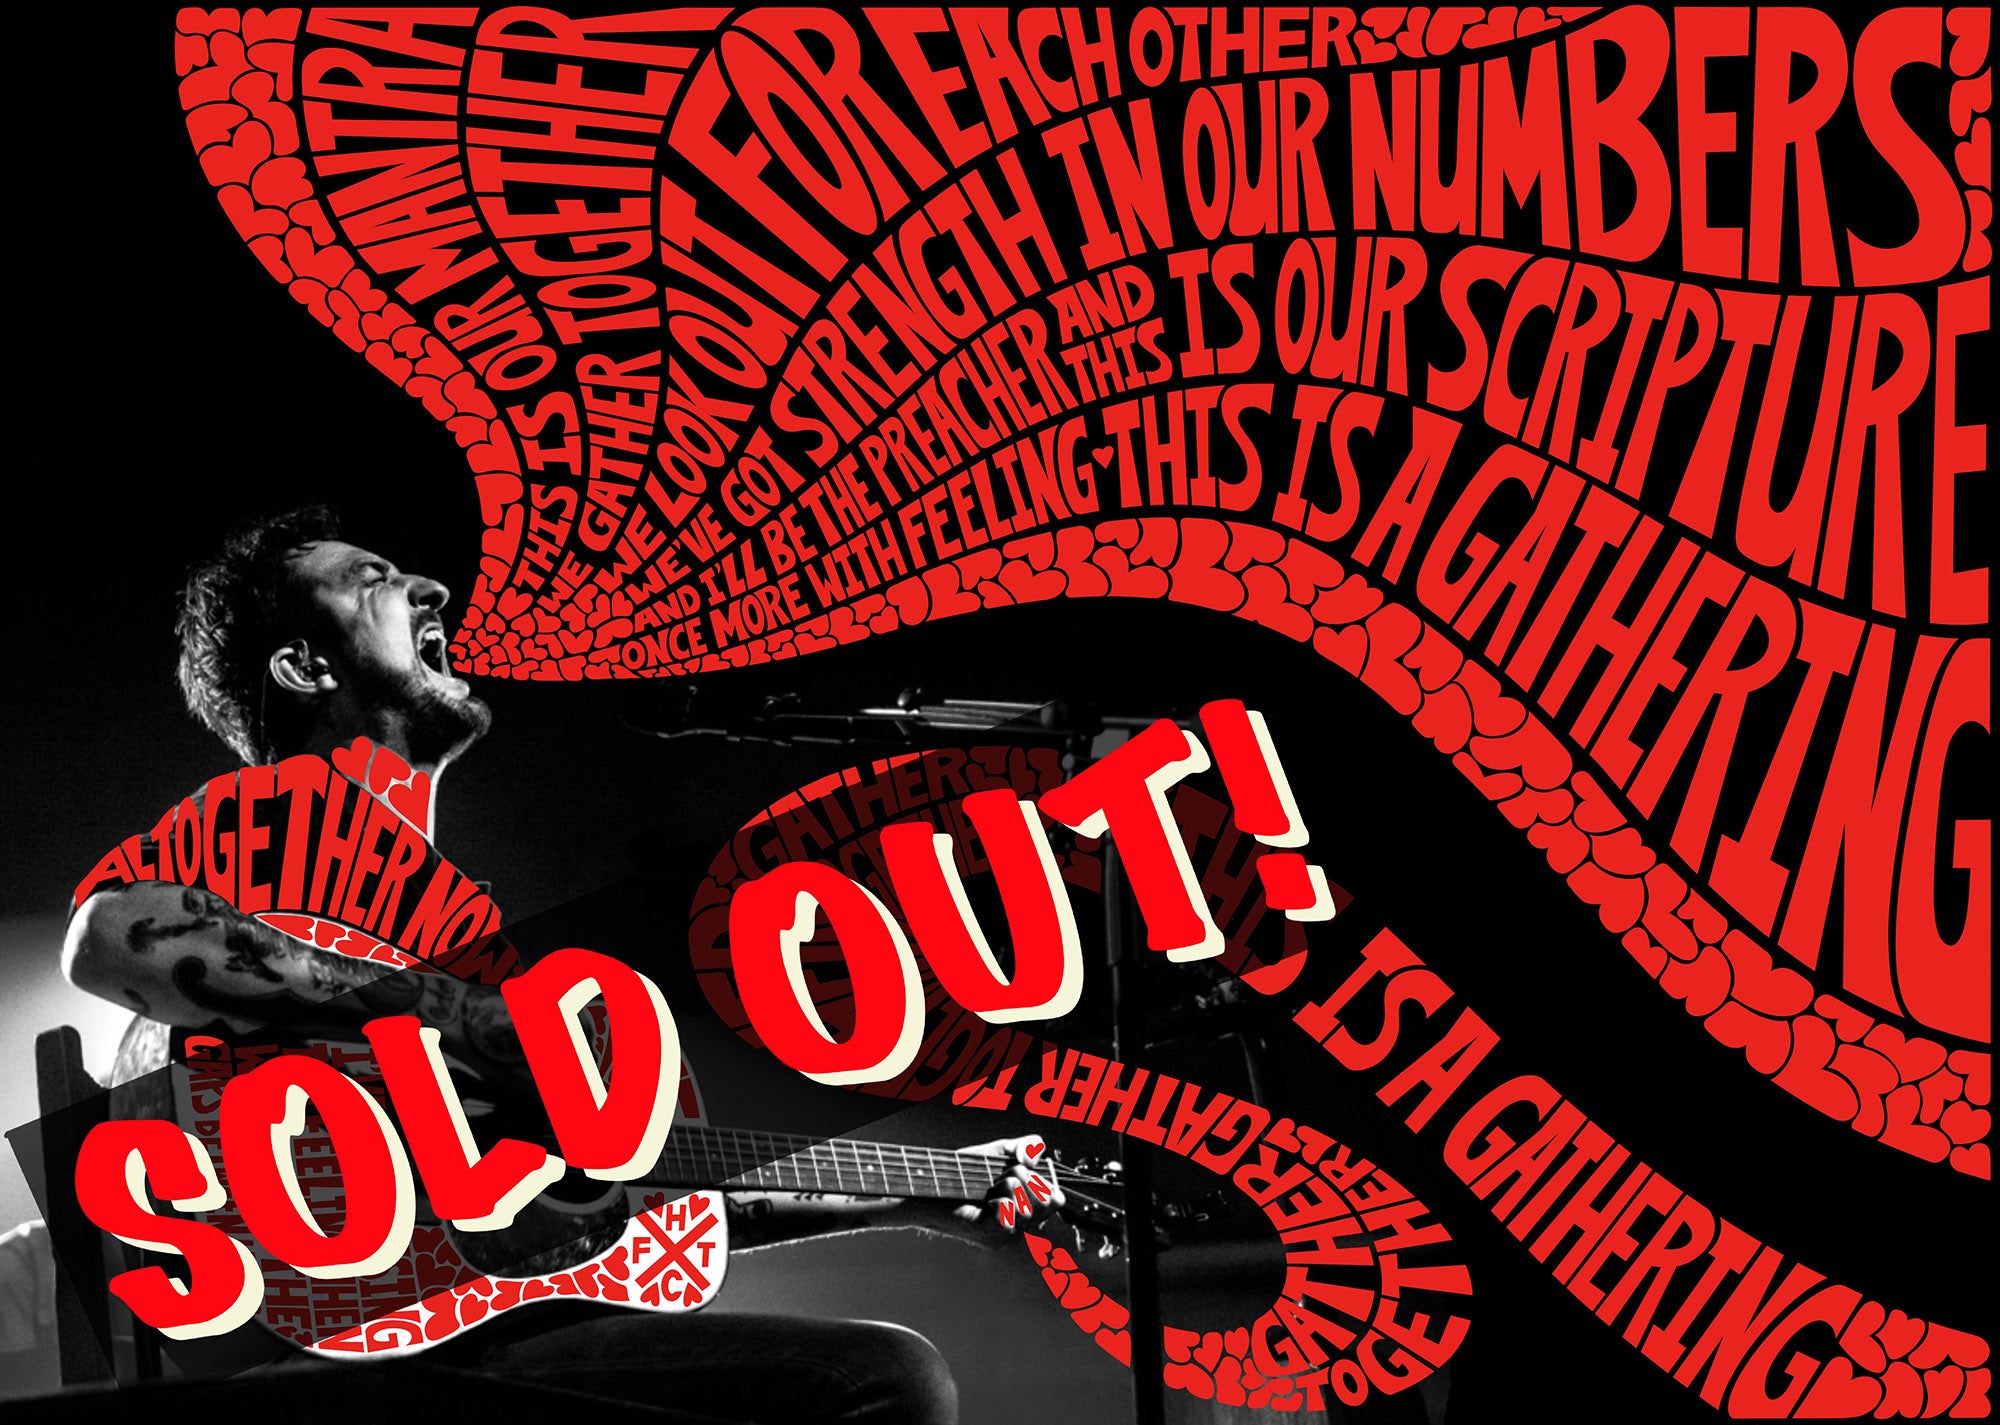 Nan x Frank Turner - The Gathering - SOLD OUT